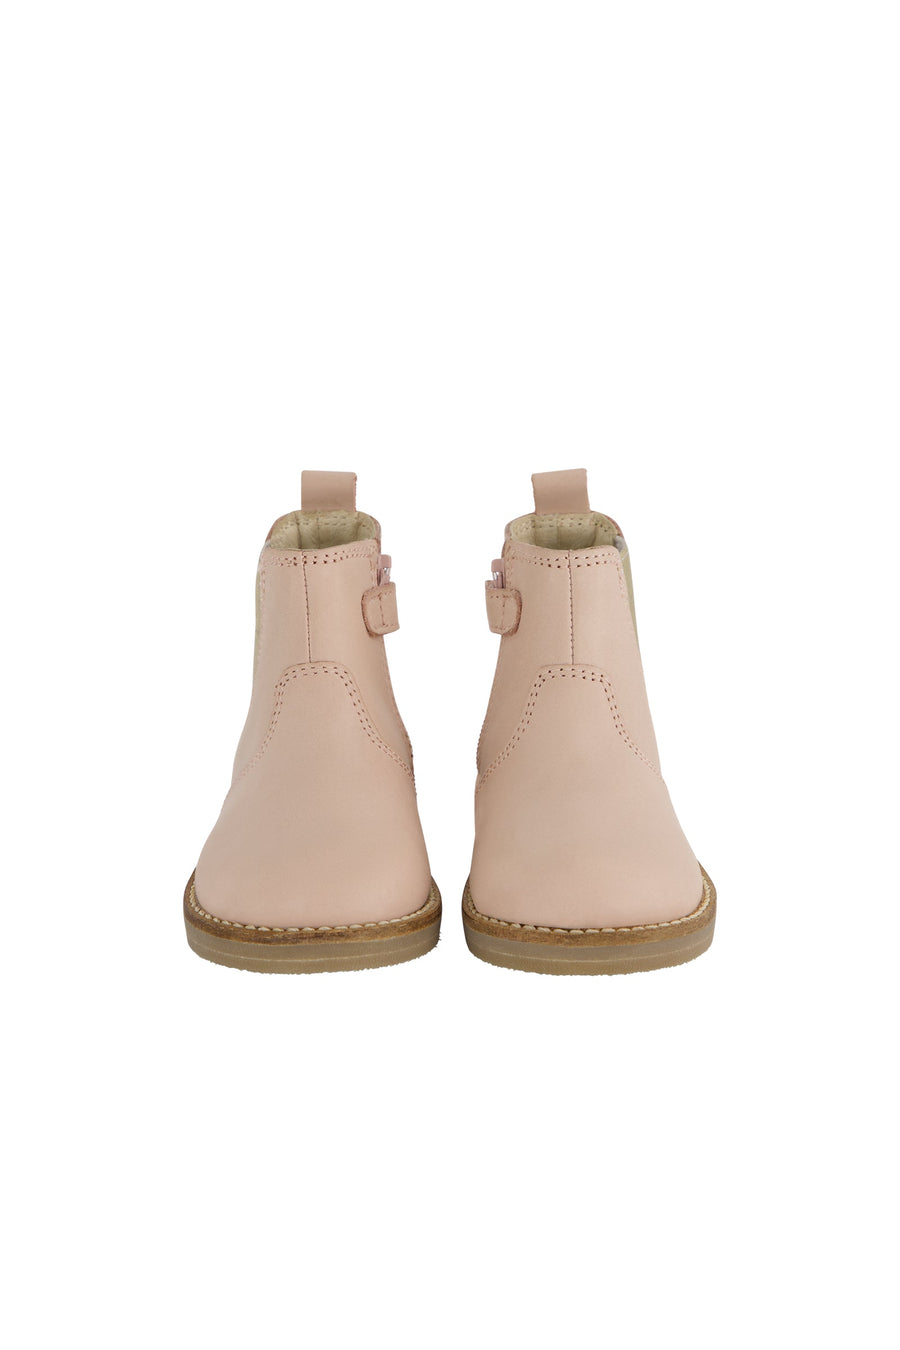 Leather Boot with Elastic Side - Blush Childrens Footwear from Jamie Kay USA